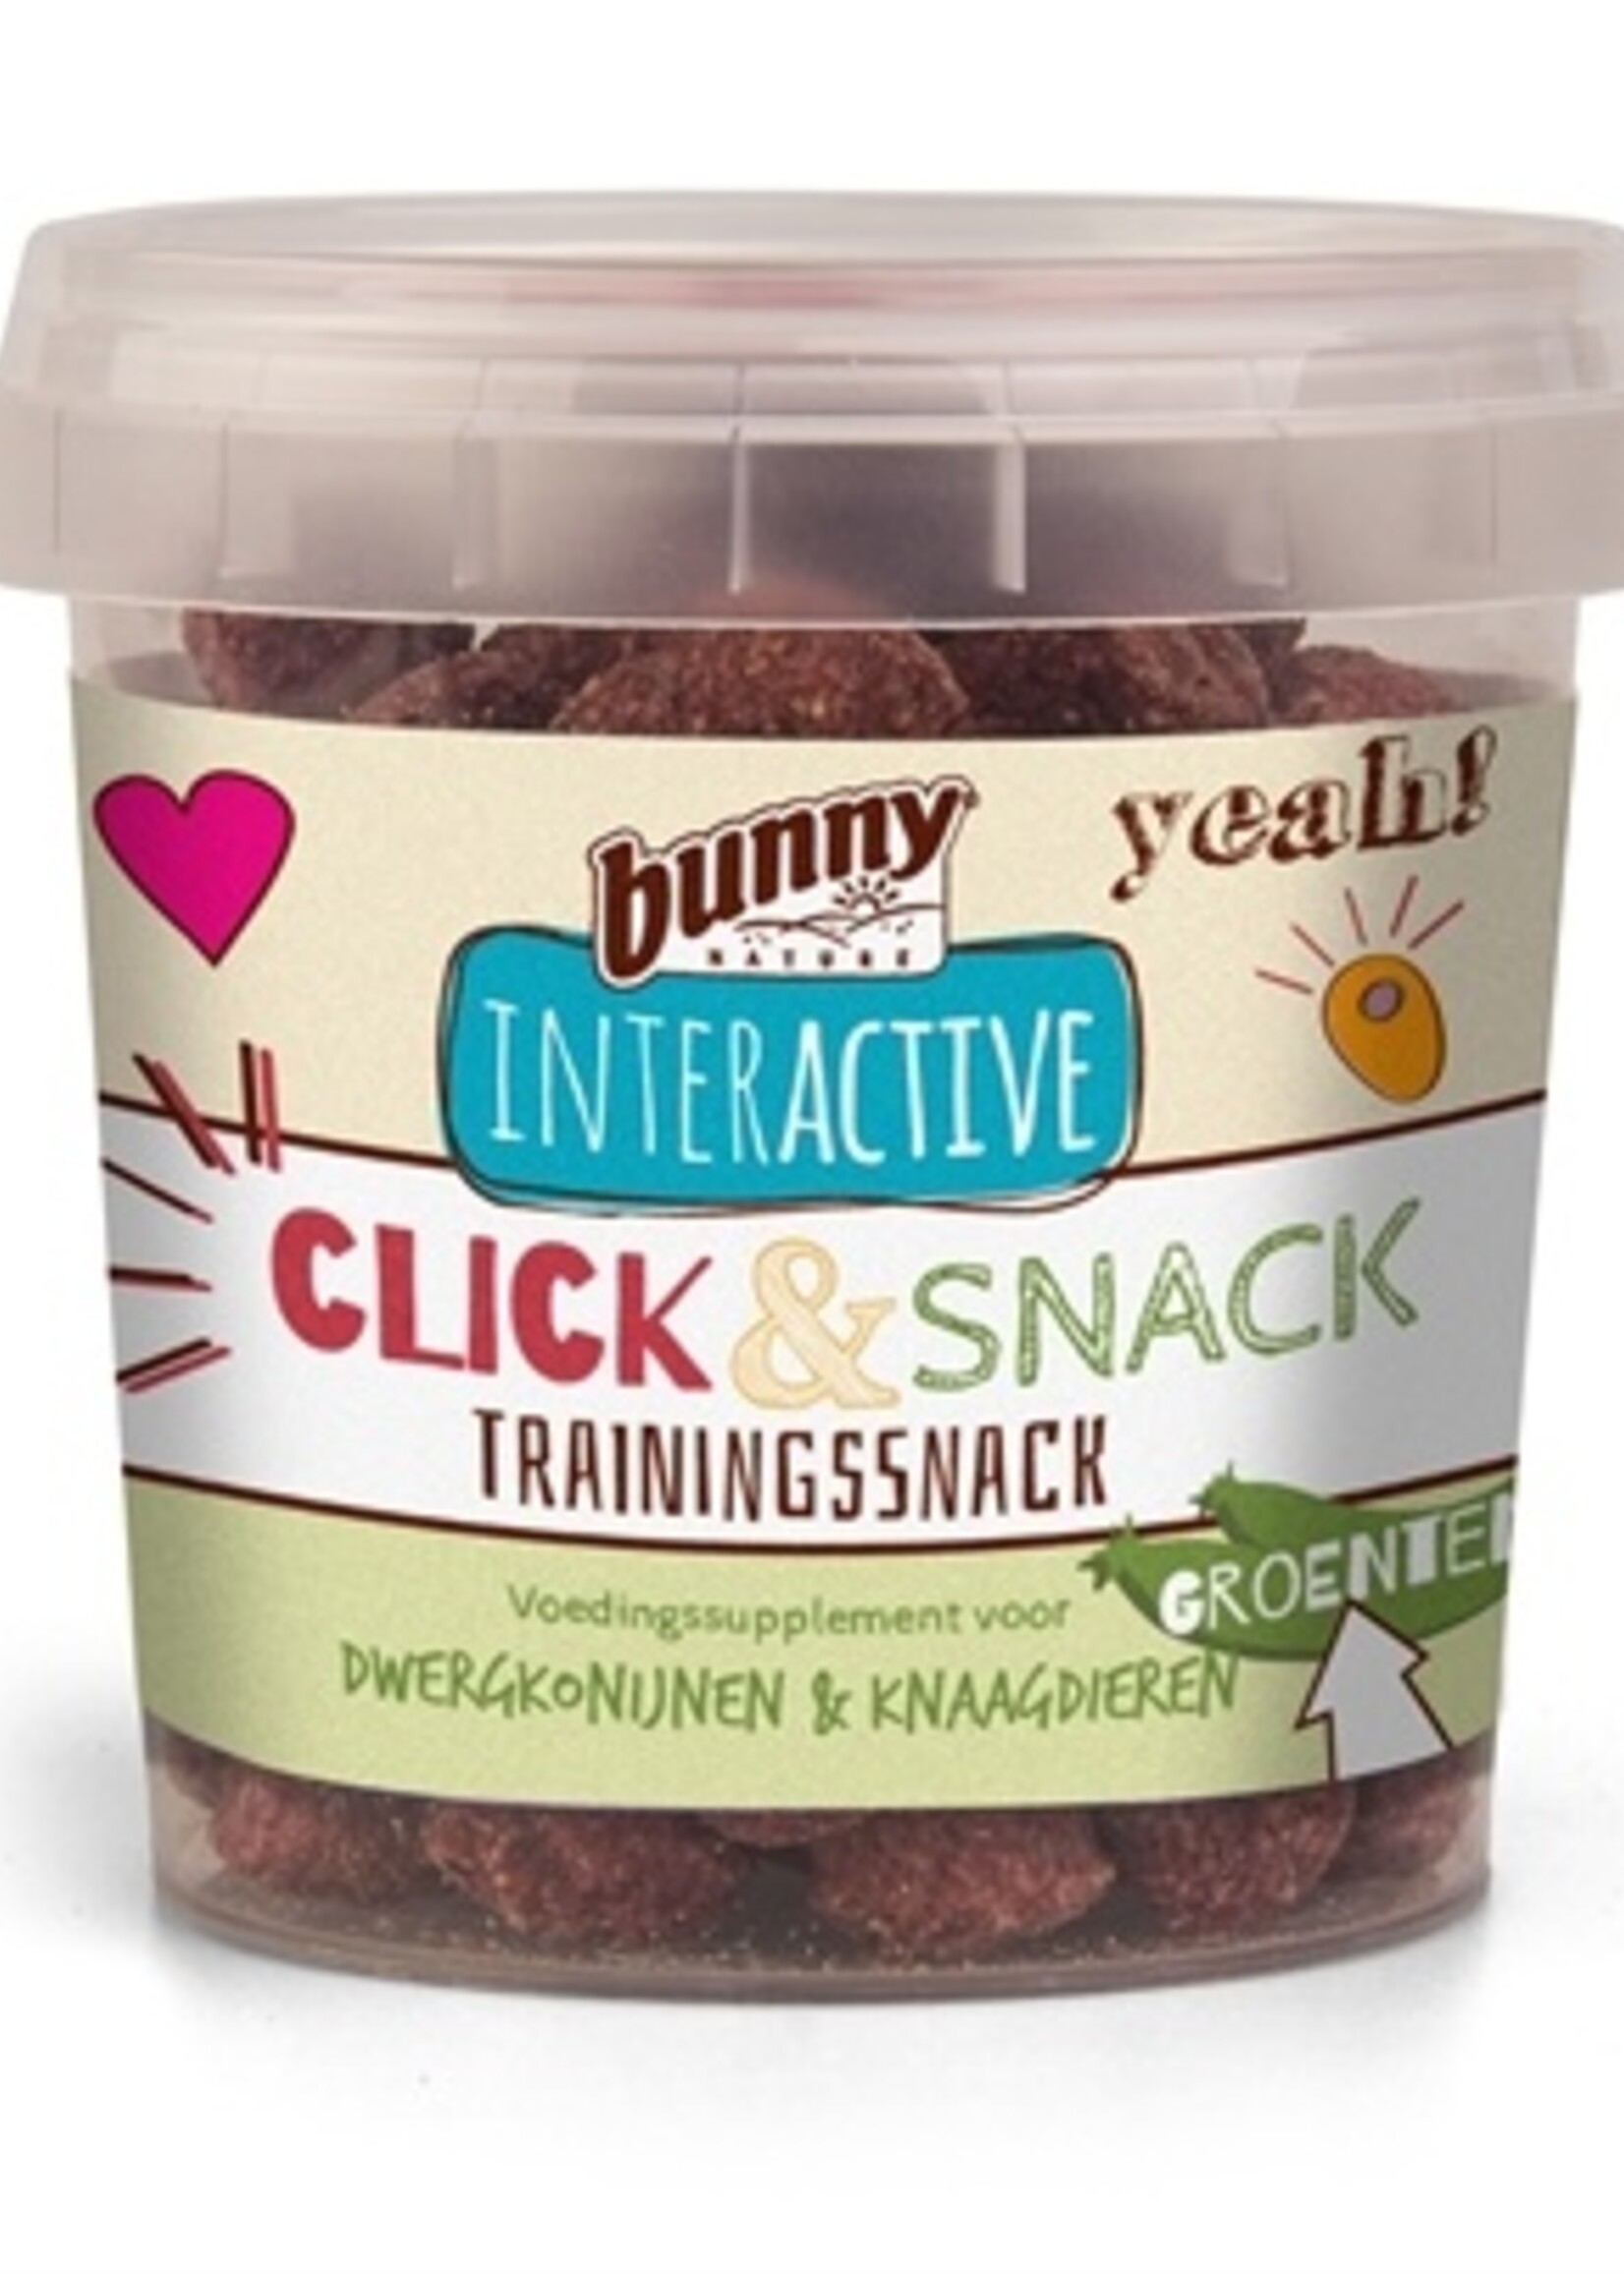 Bunny nature Bunny nature click & snack trainingssnack groente